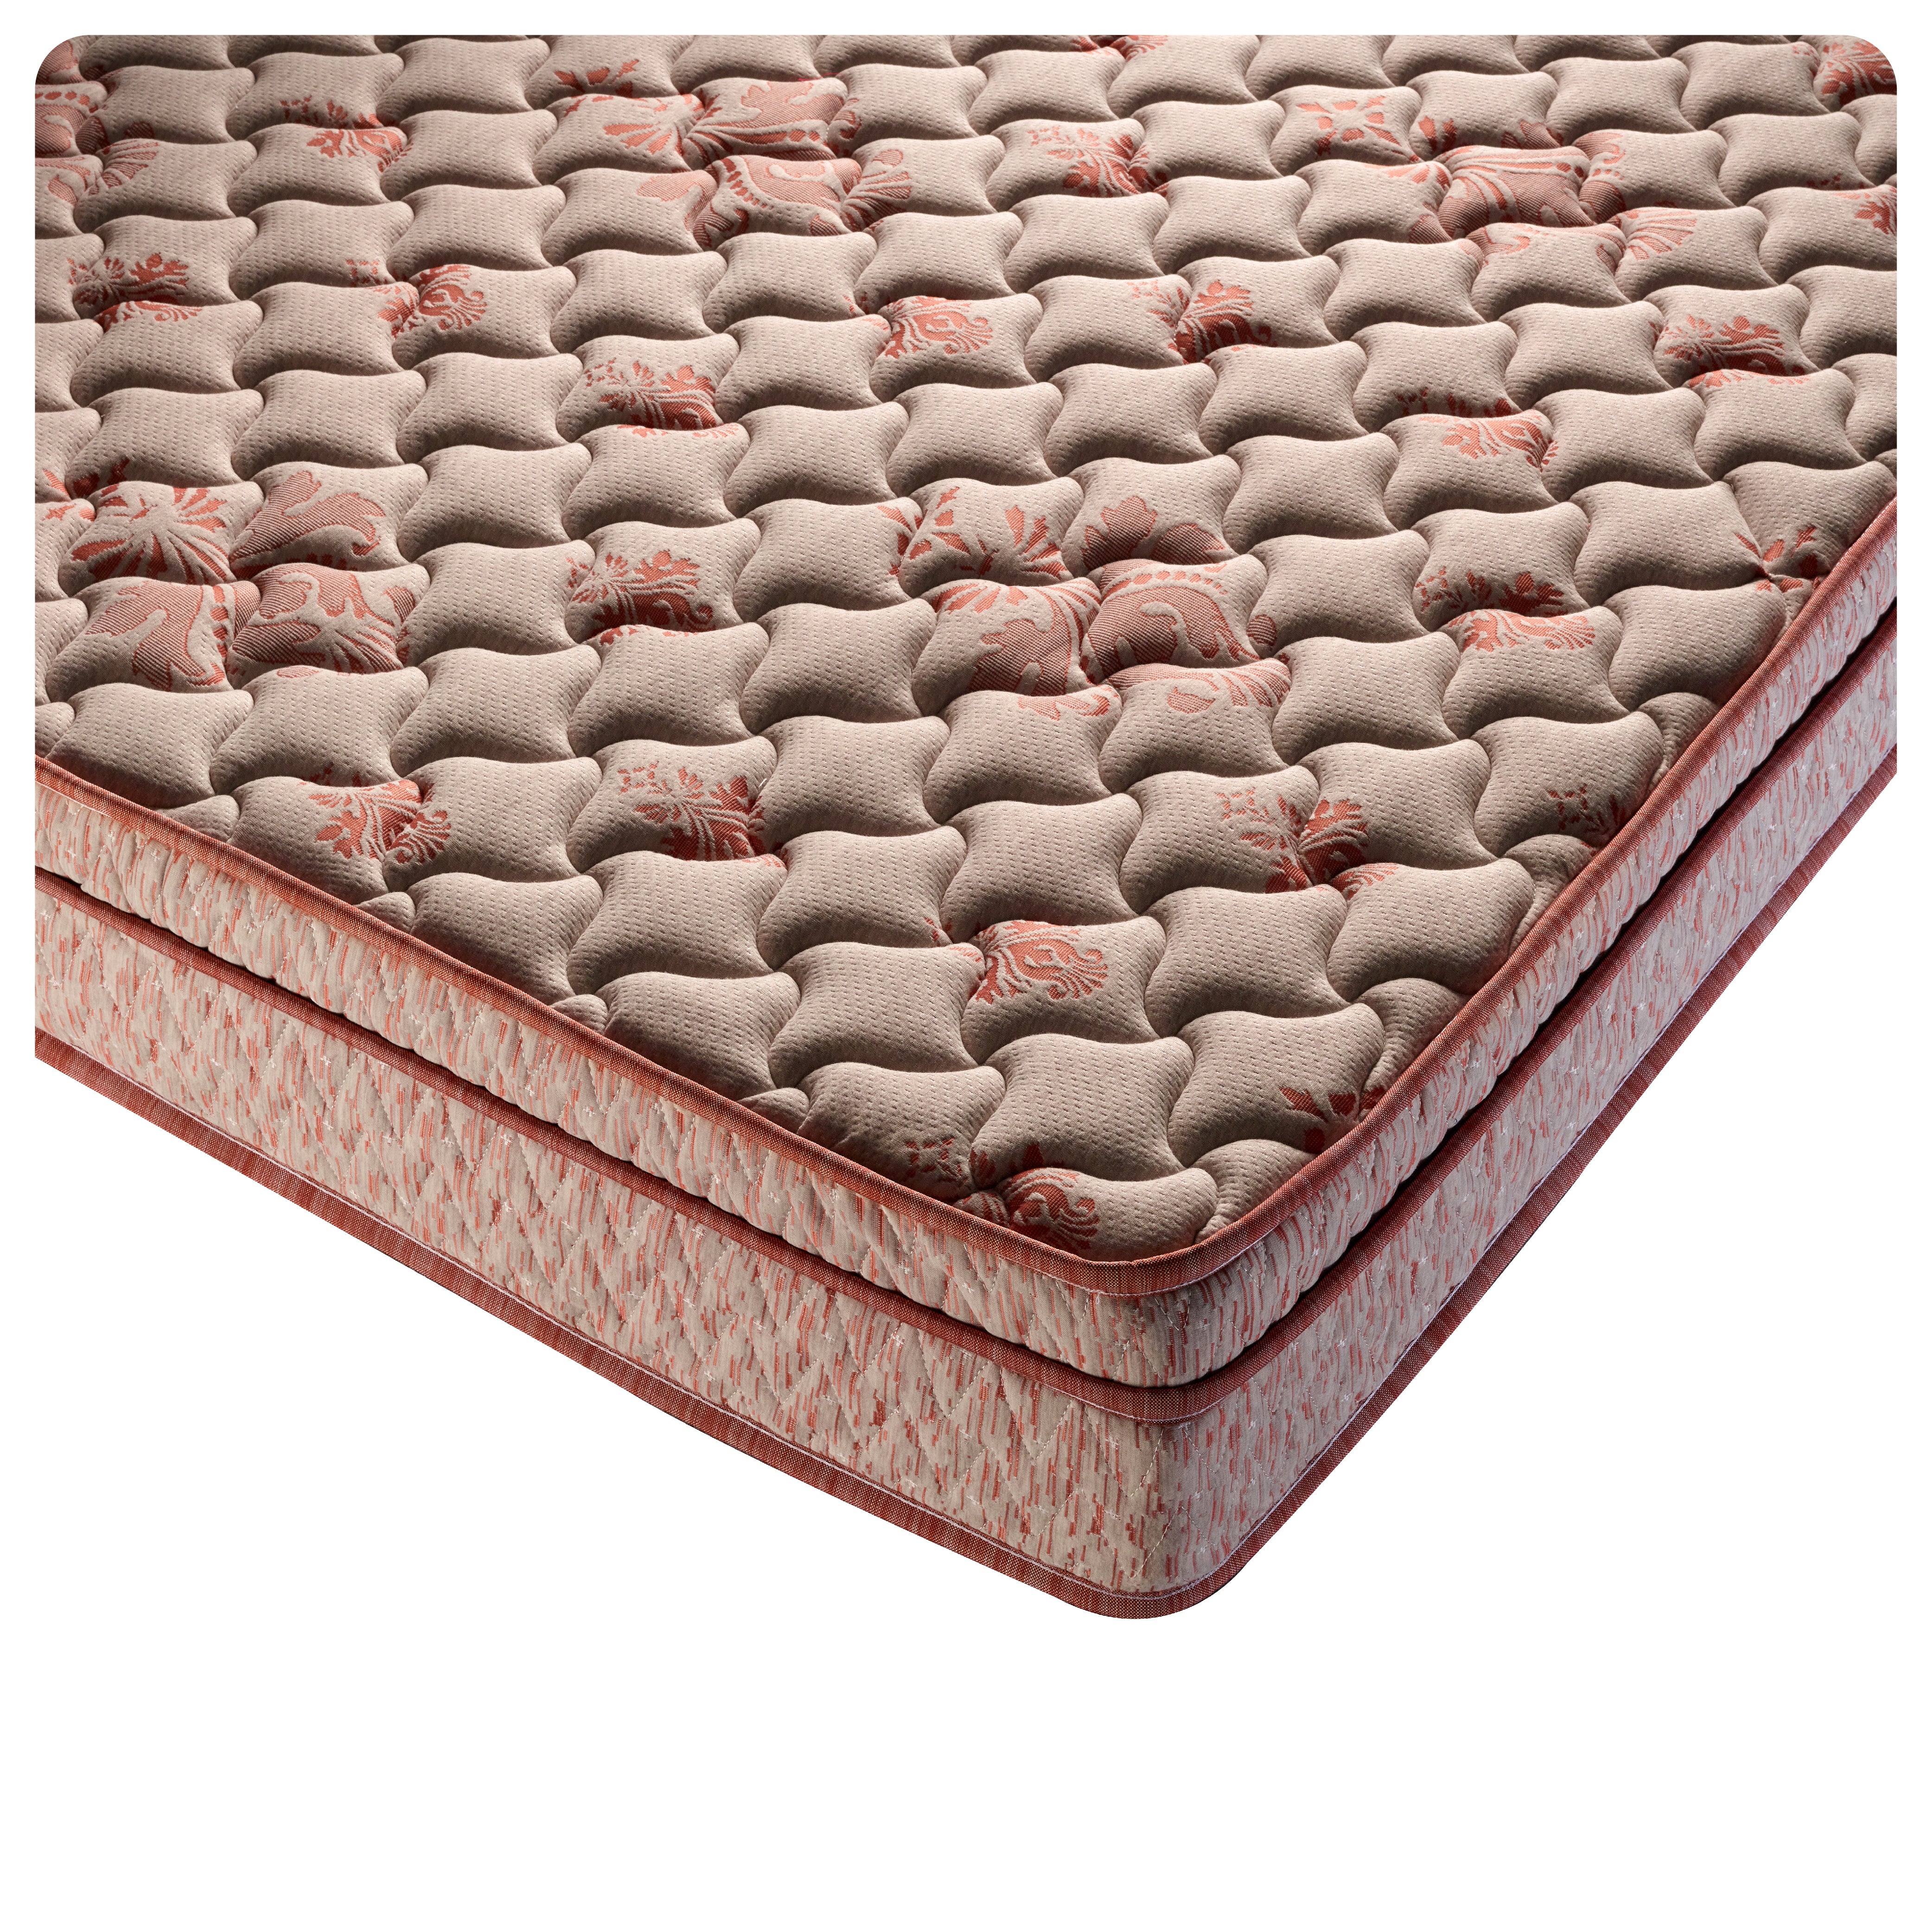 Buy Orthopedic Back Support Sandwiched Coir Mattress